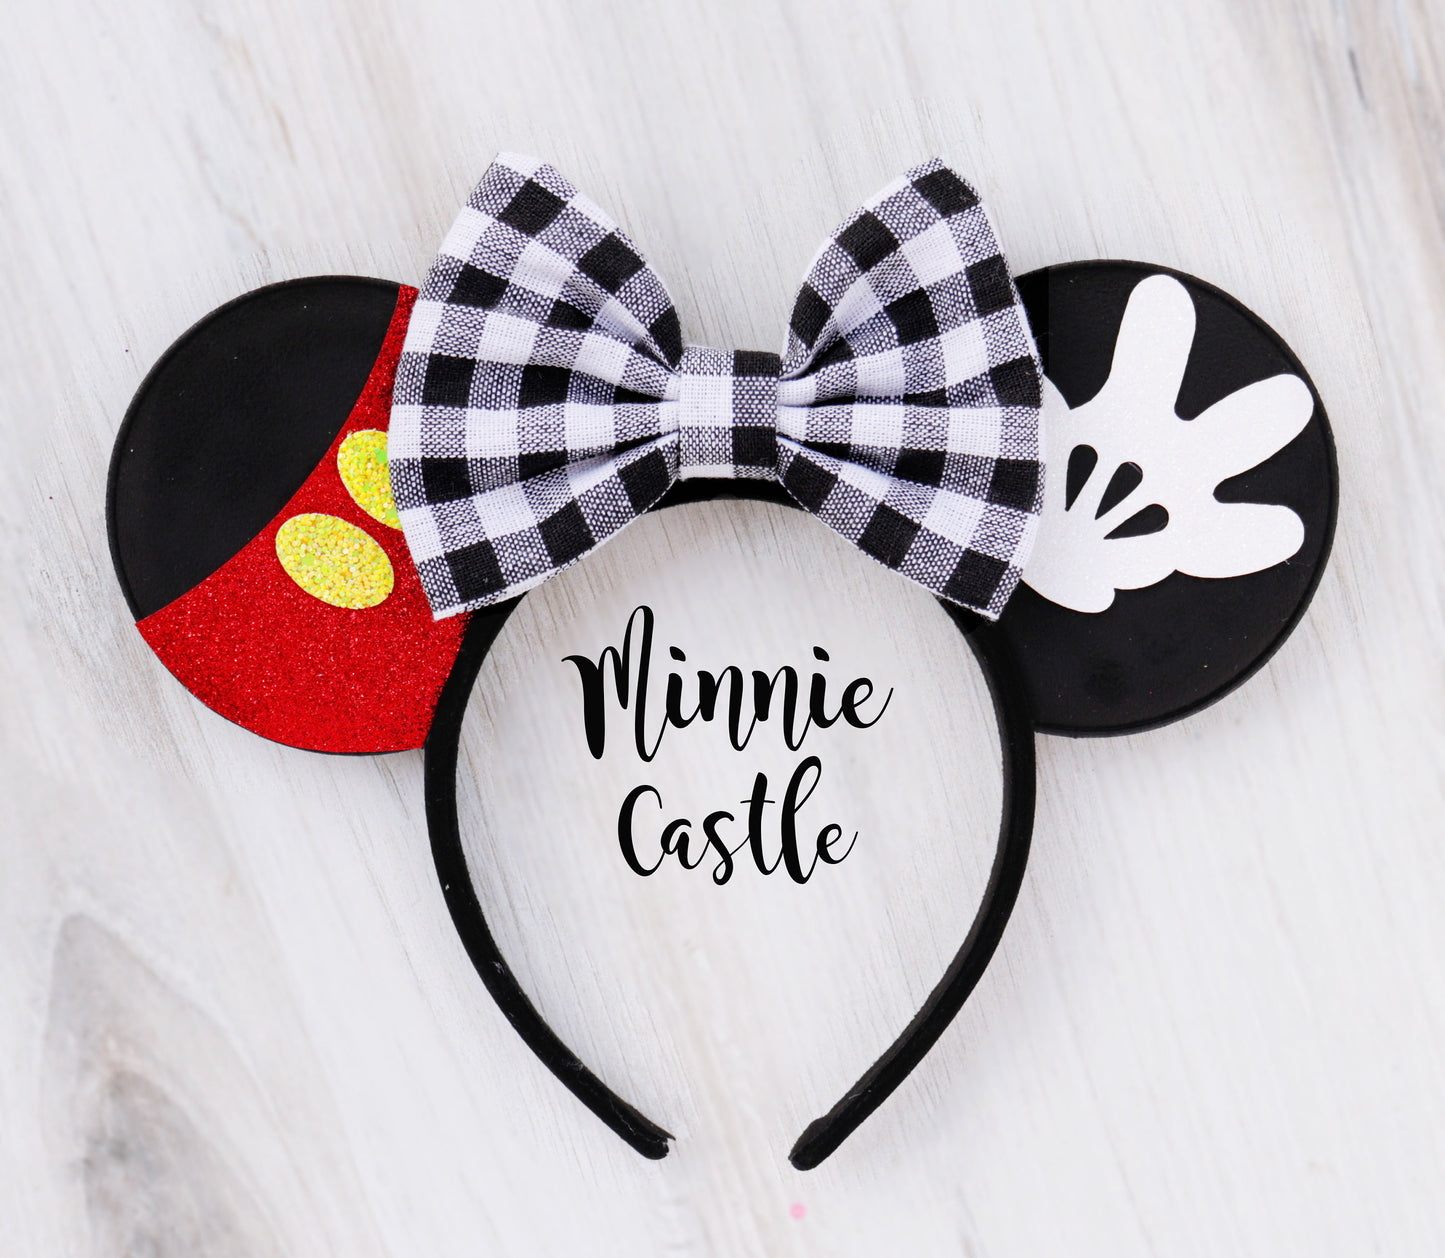 Red white Checkered Bow Mickey Ears